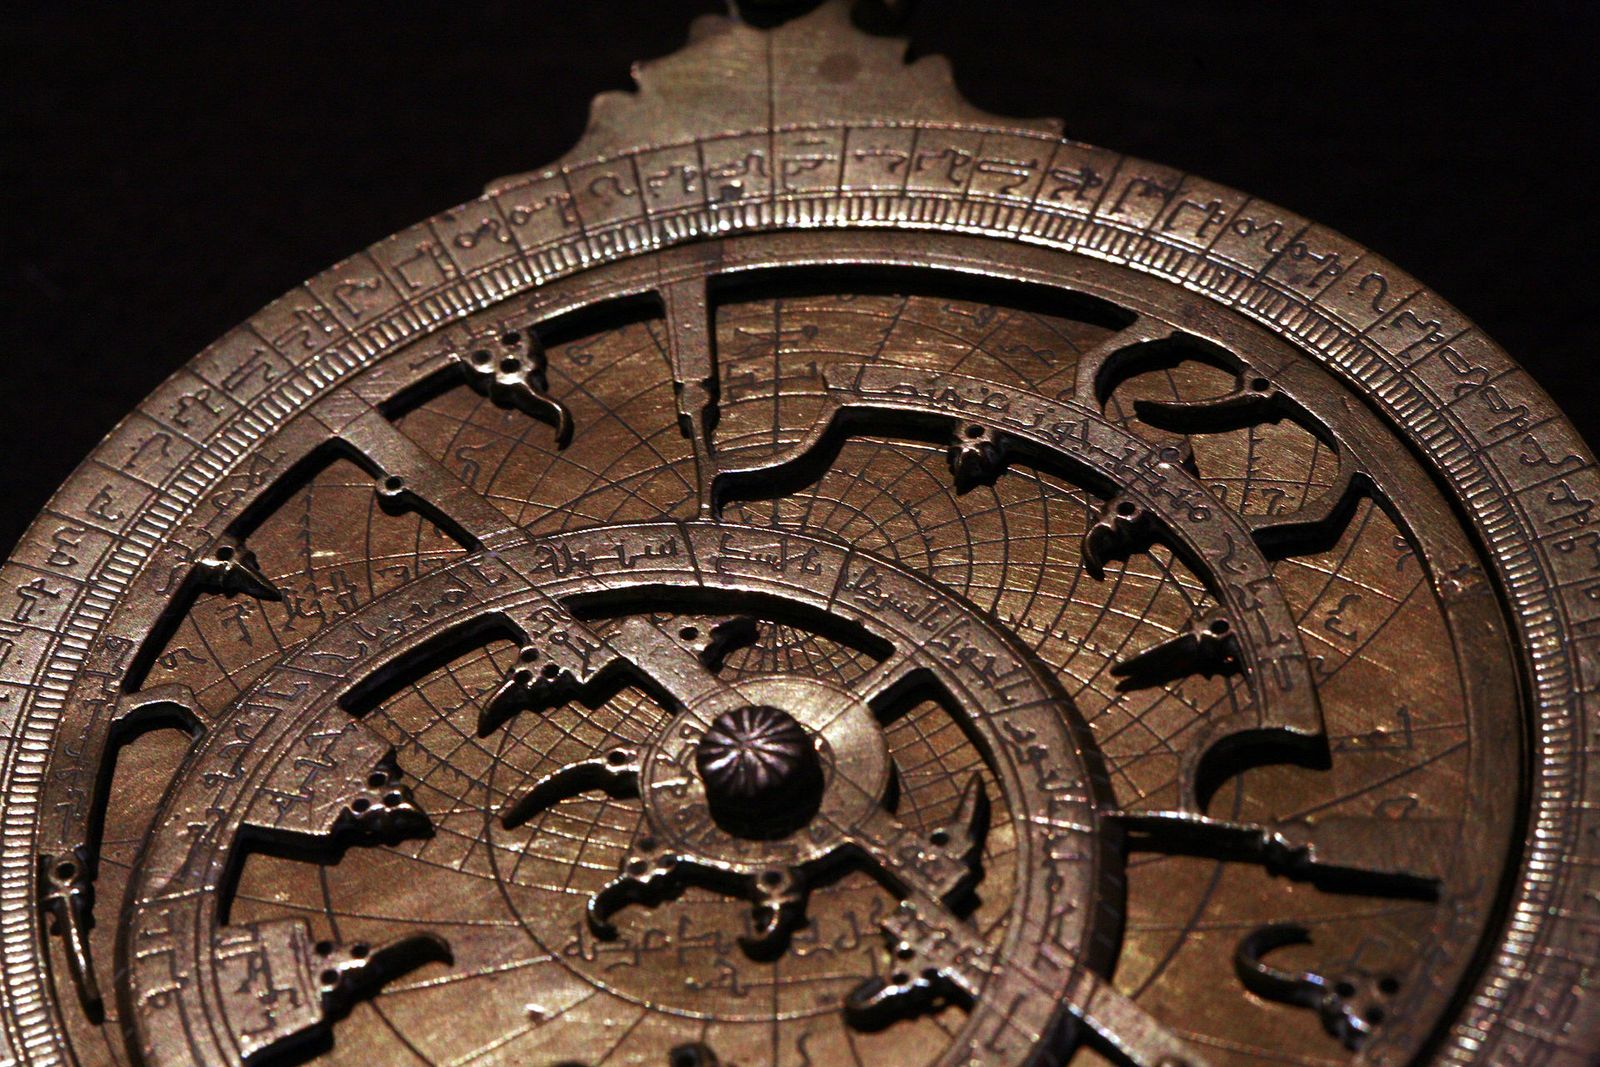 Astrolabe, Definition, Function & History - Video & Lesson Transcript